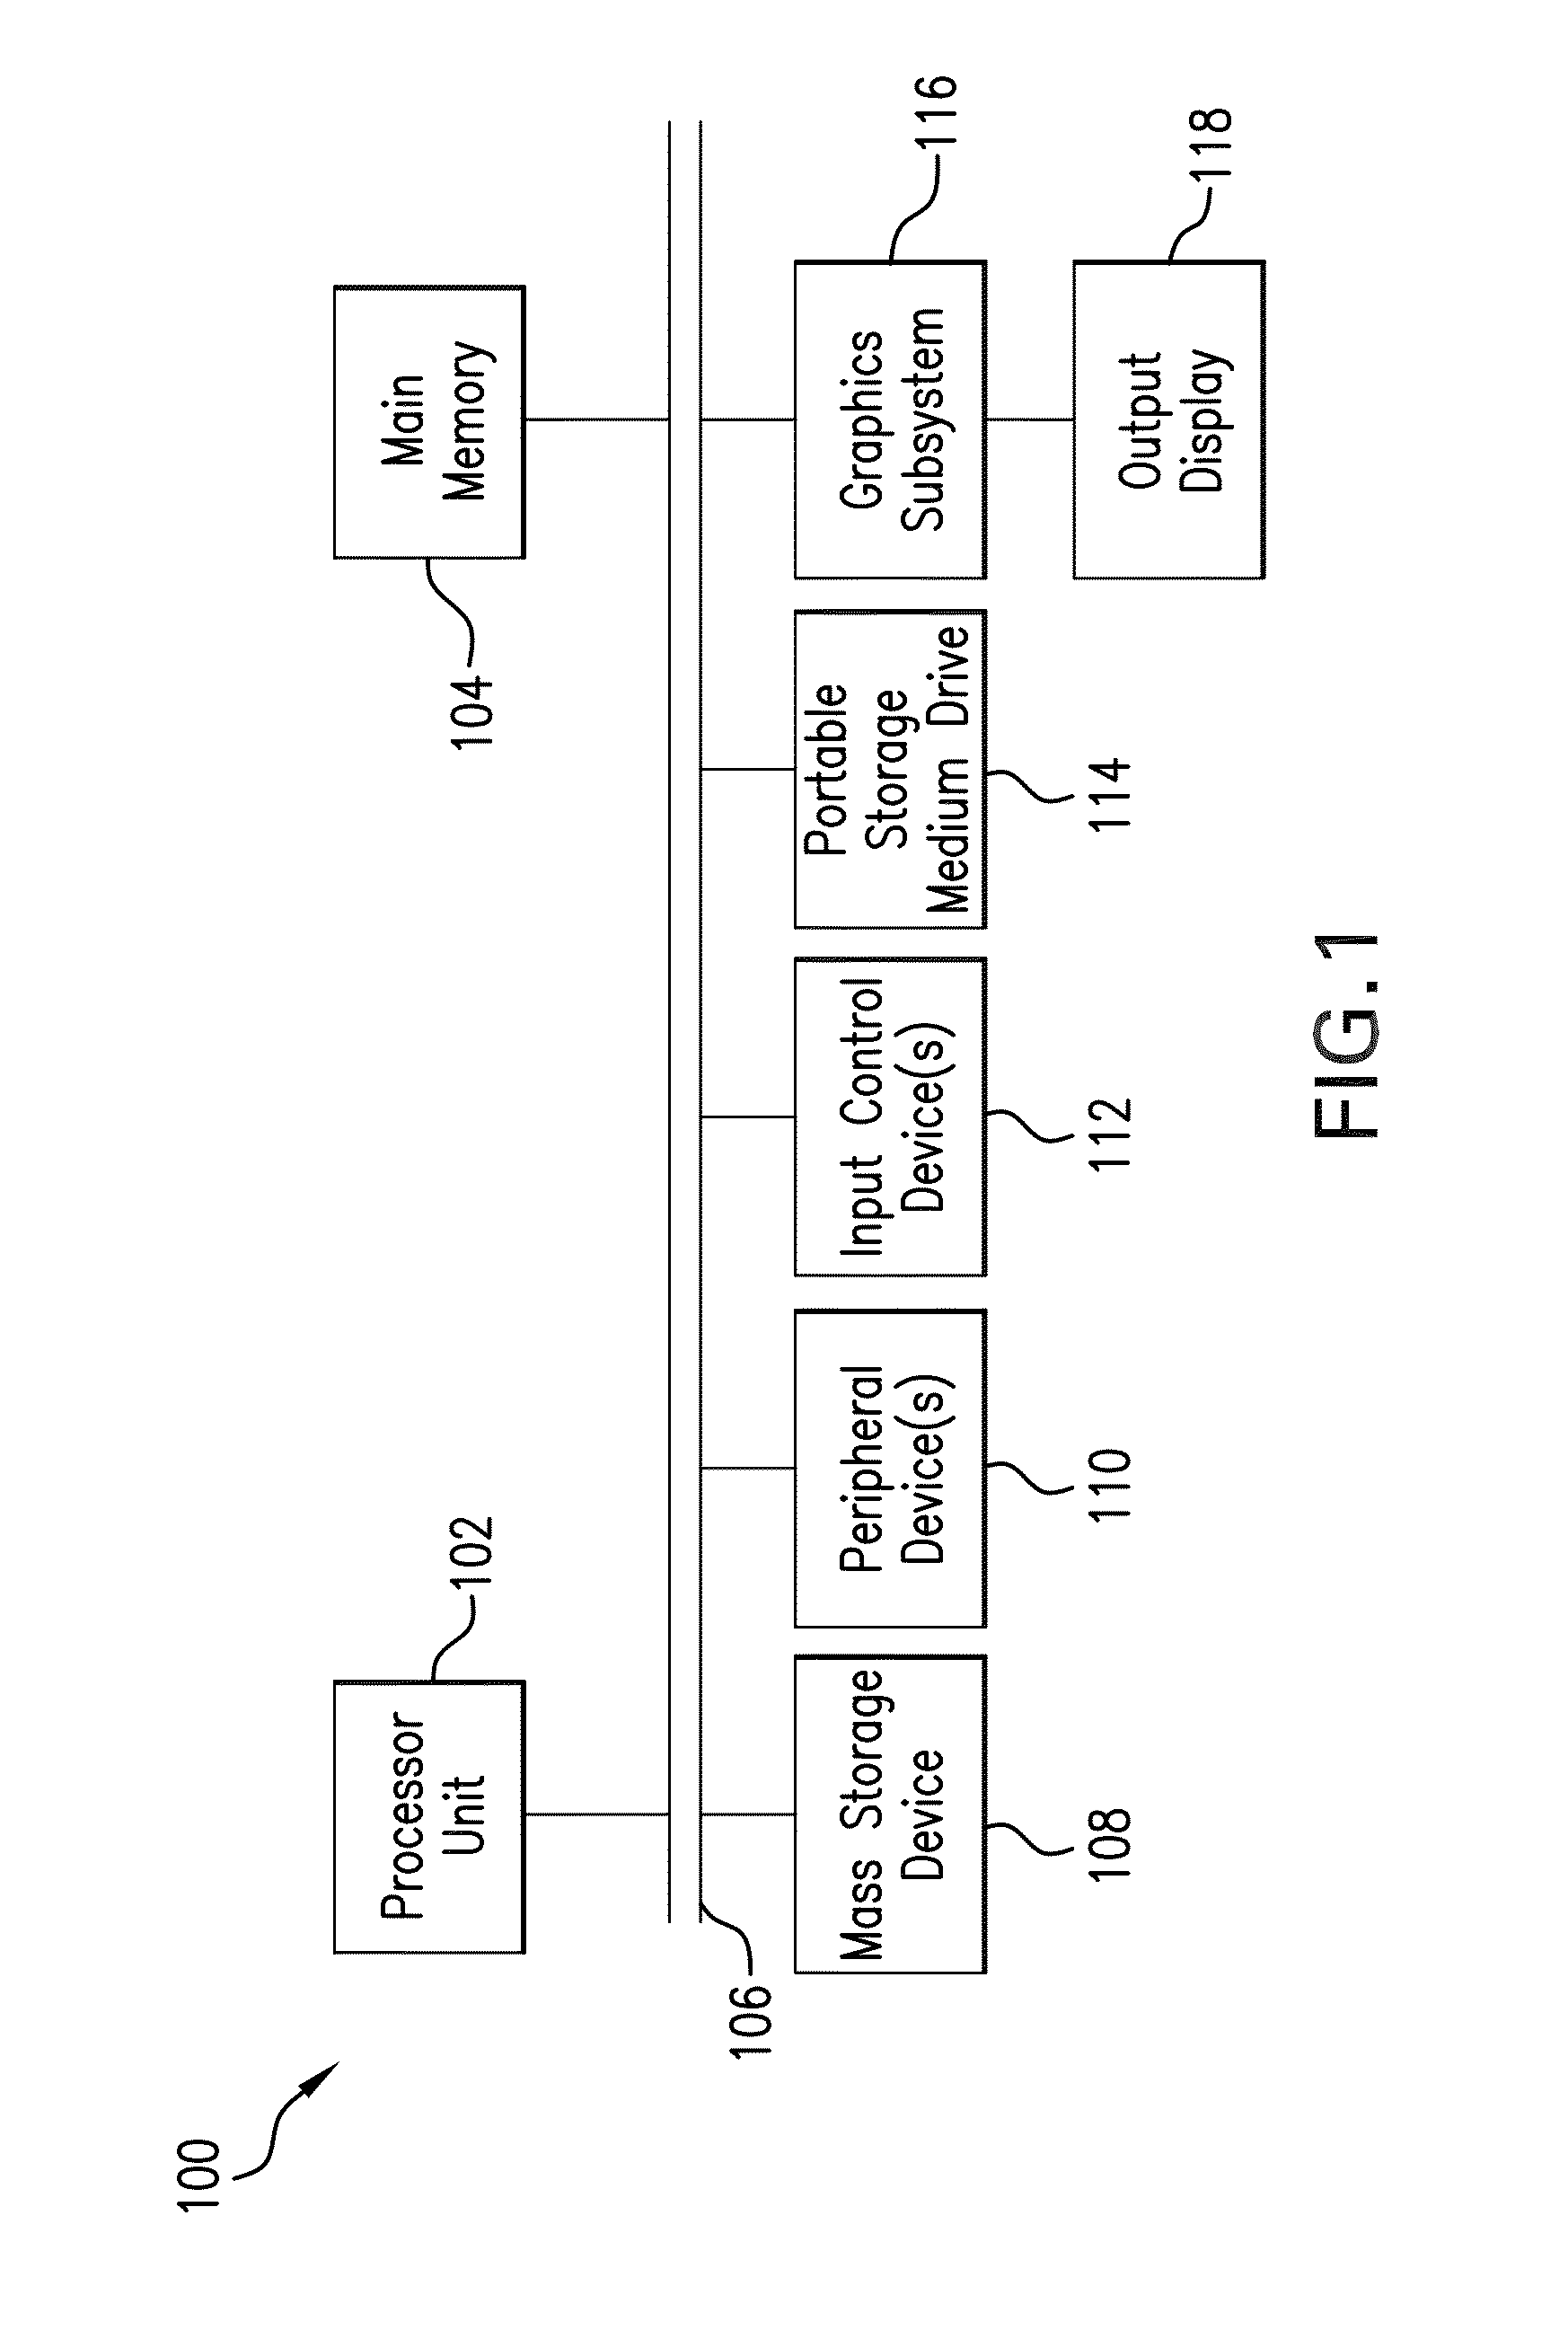 System and method for automatically reconfiguring chain of abutted devices in electronic circuit design